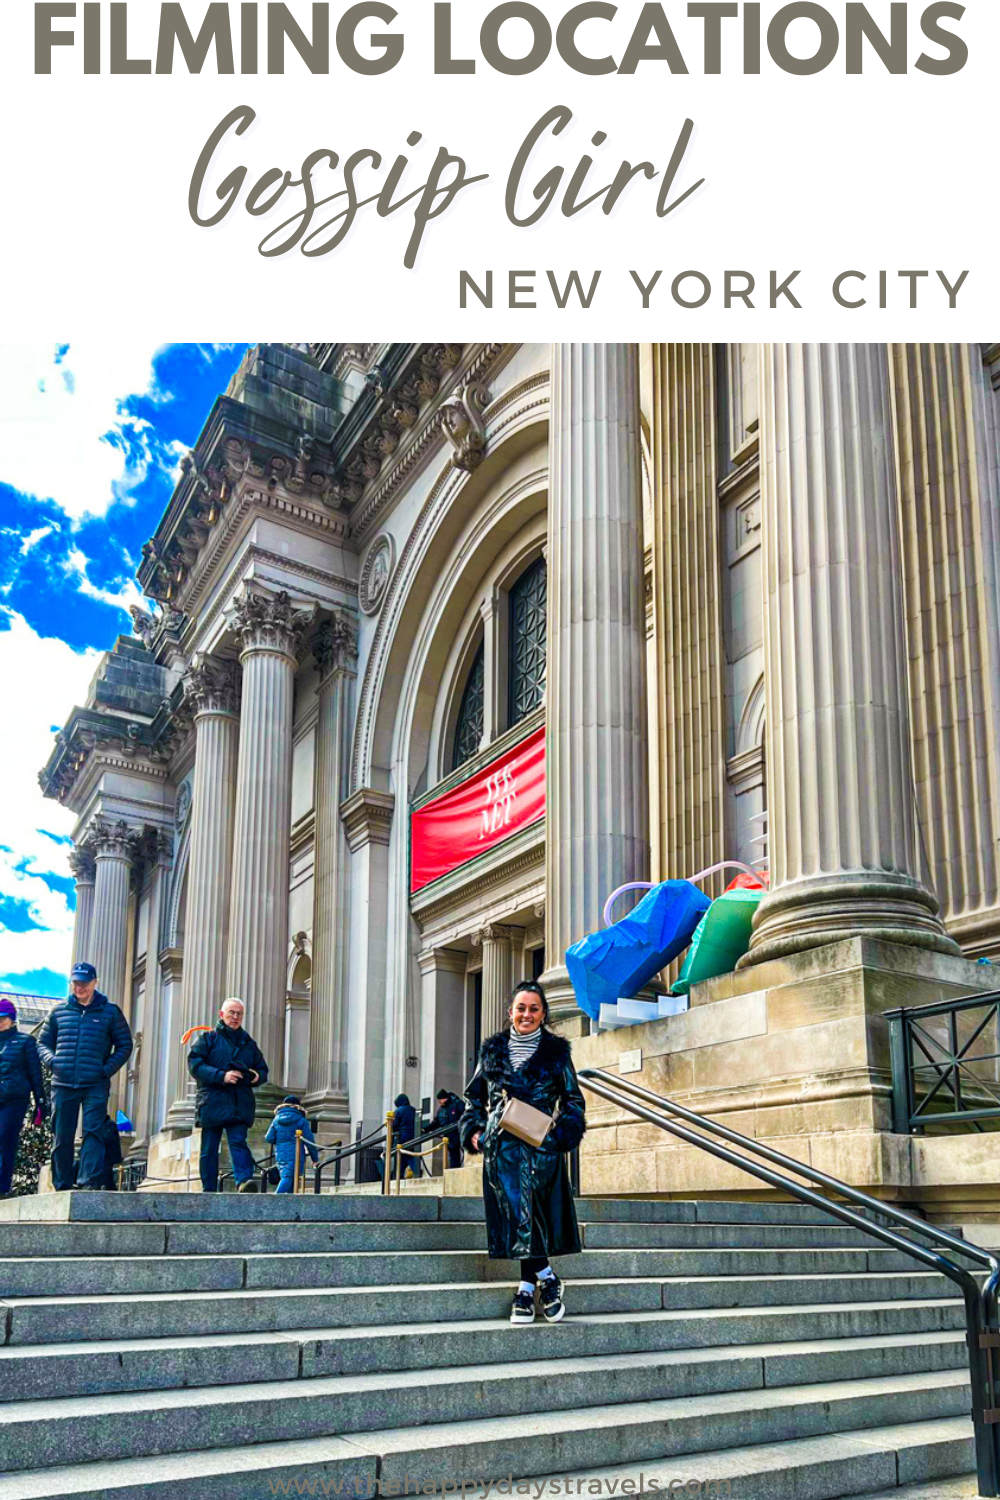 pin image text reads 'Filming Locations Gossip Girl New York City' with image of Shireen posing on The Met Steps